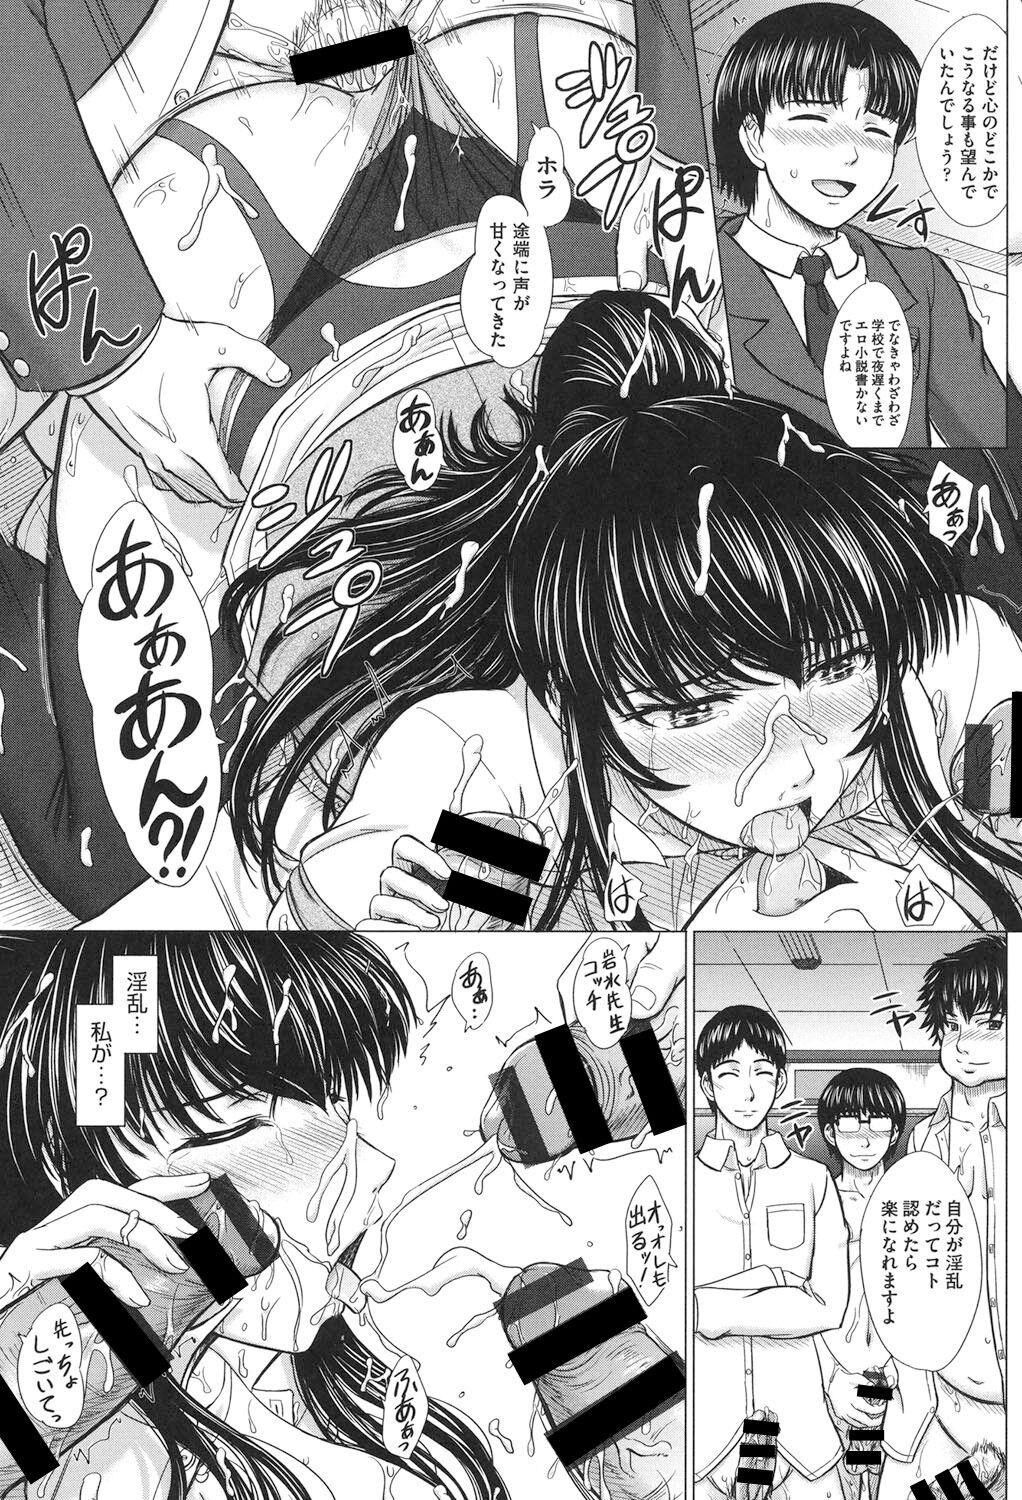 Houkago Kouhai Note - After School Mating Notes 111